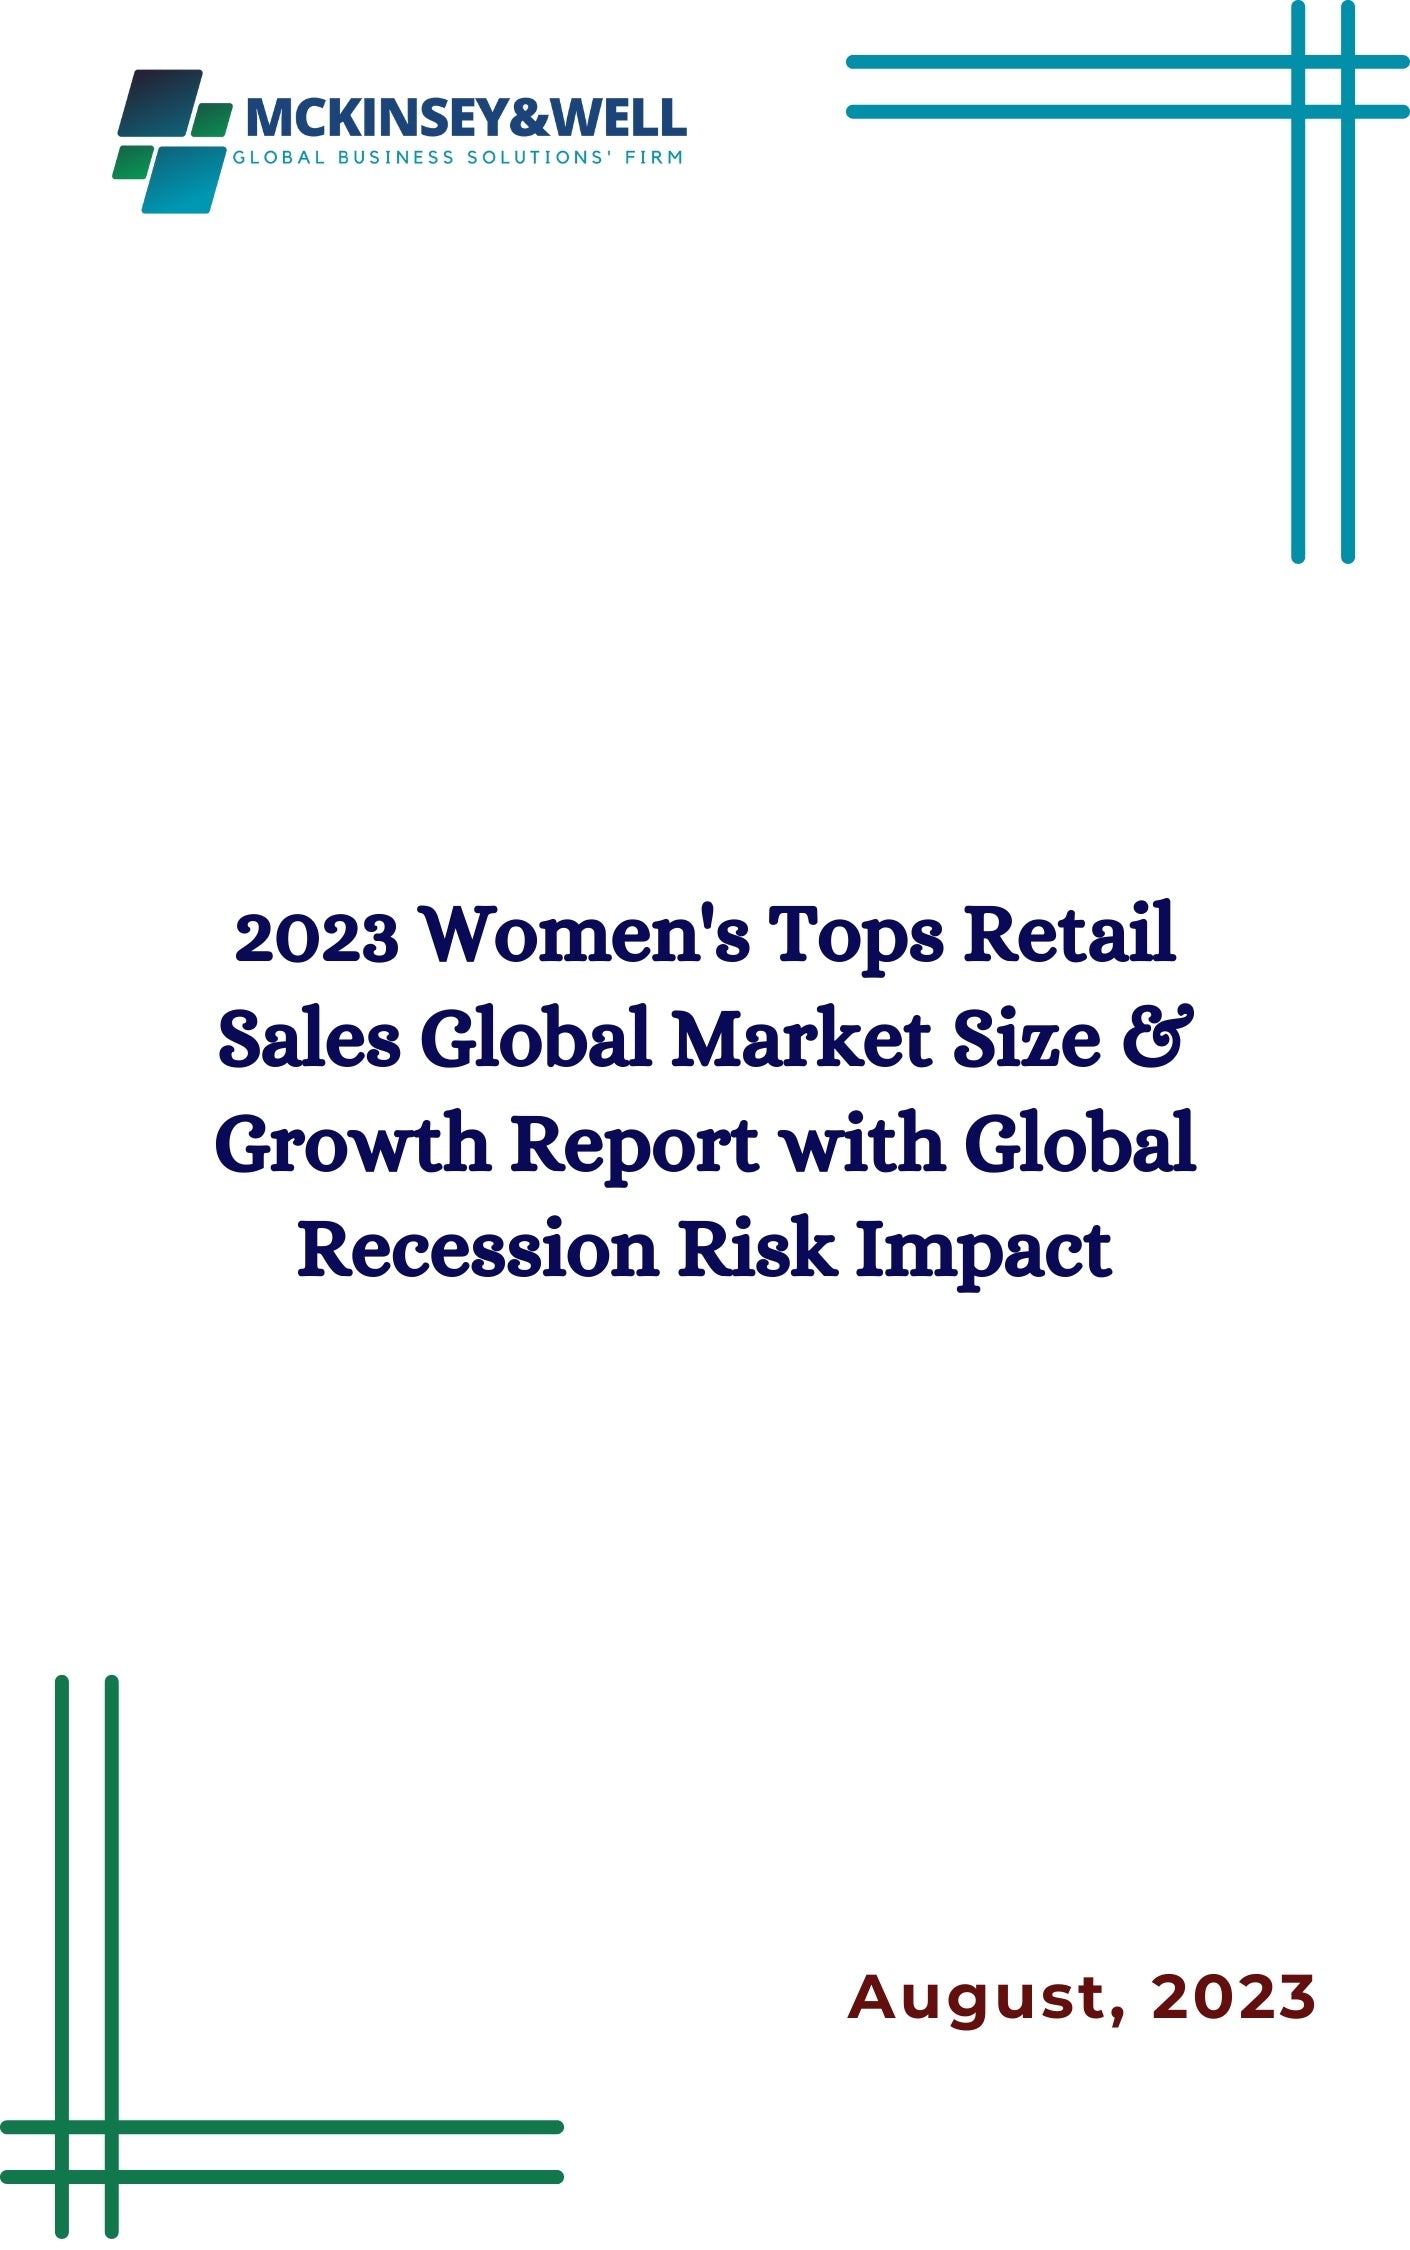 2023 Women's Tops Retail Sales Global Market Size & Growth Report with Global Recession Risk Impact